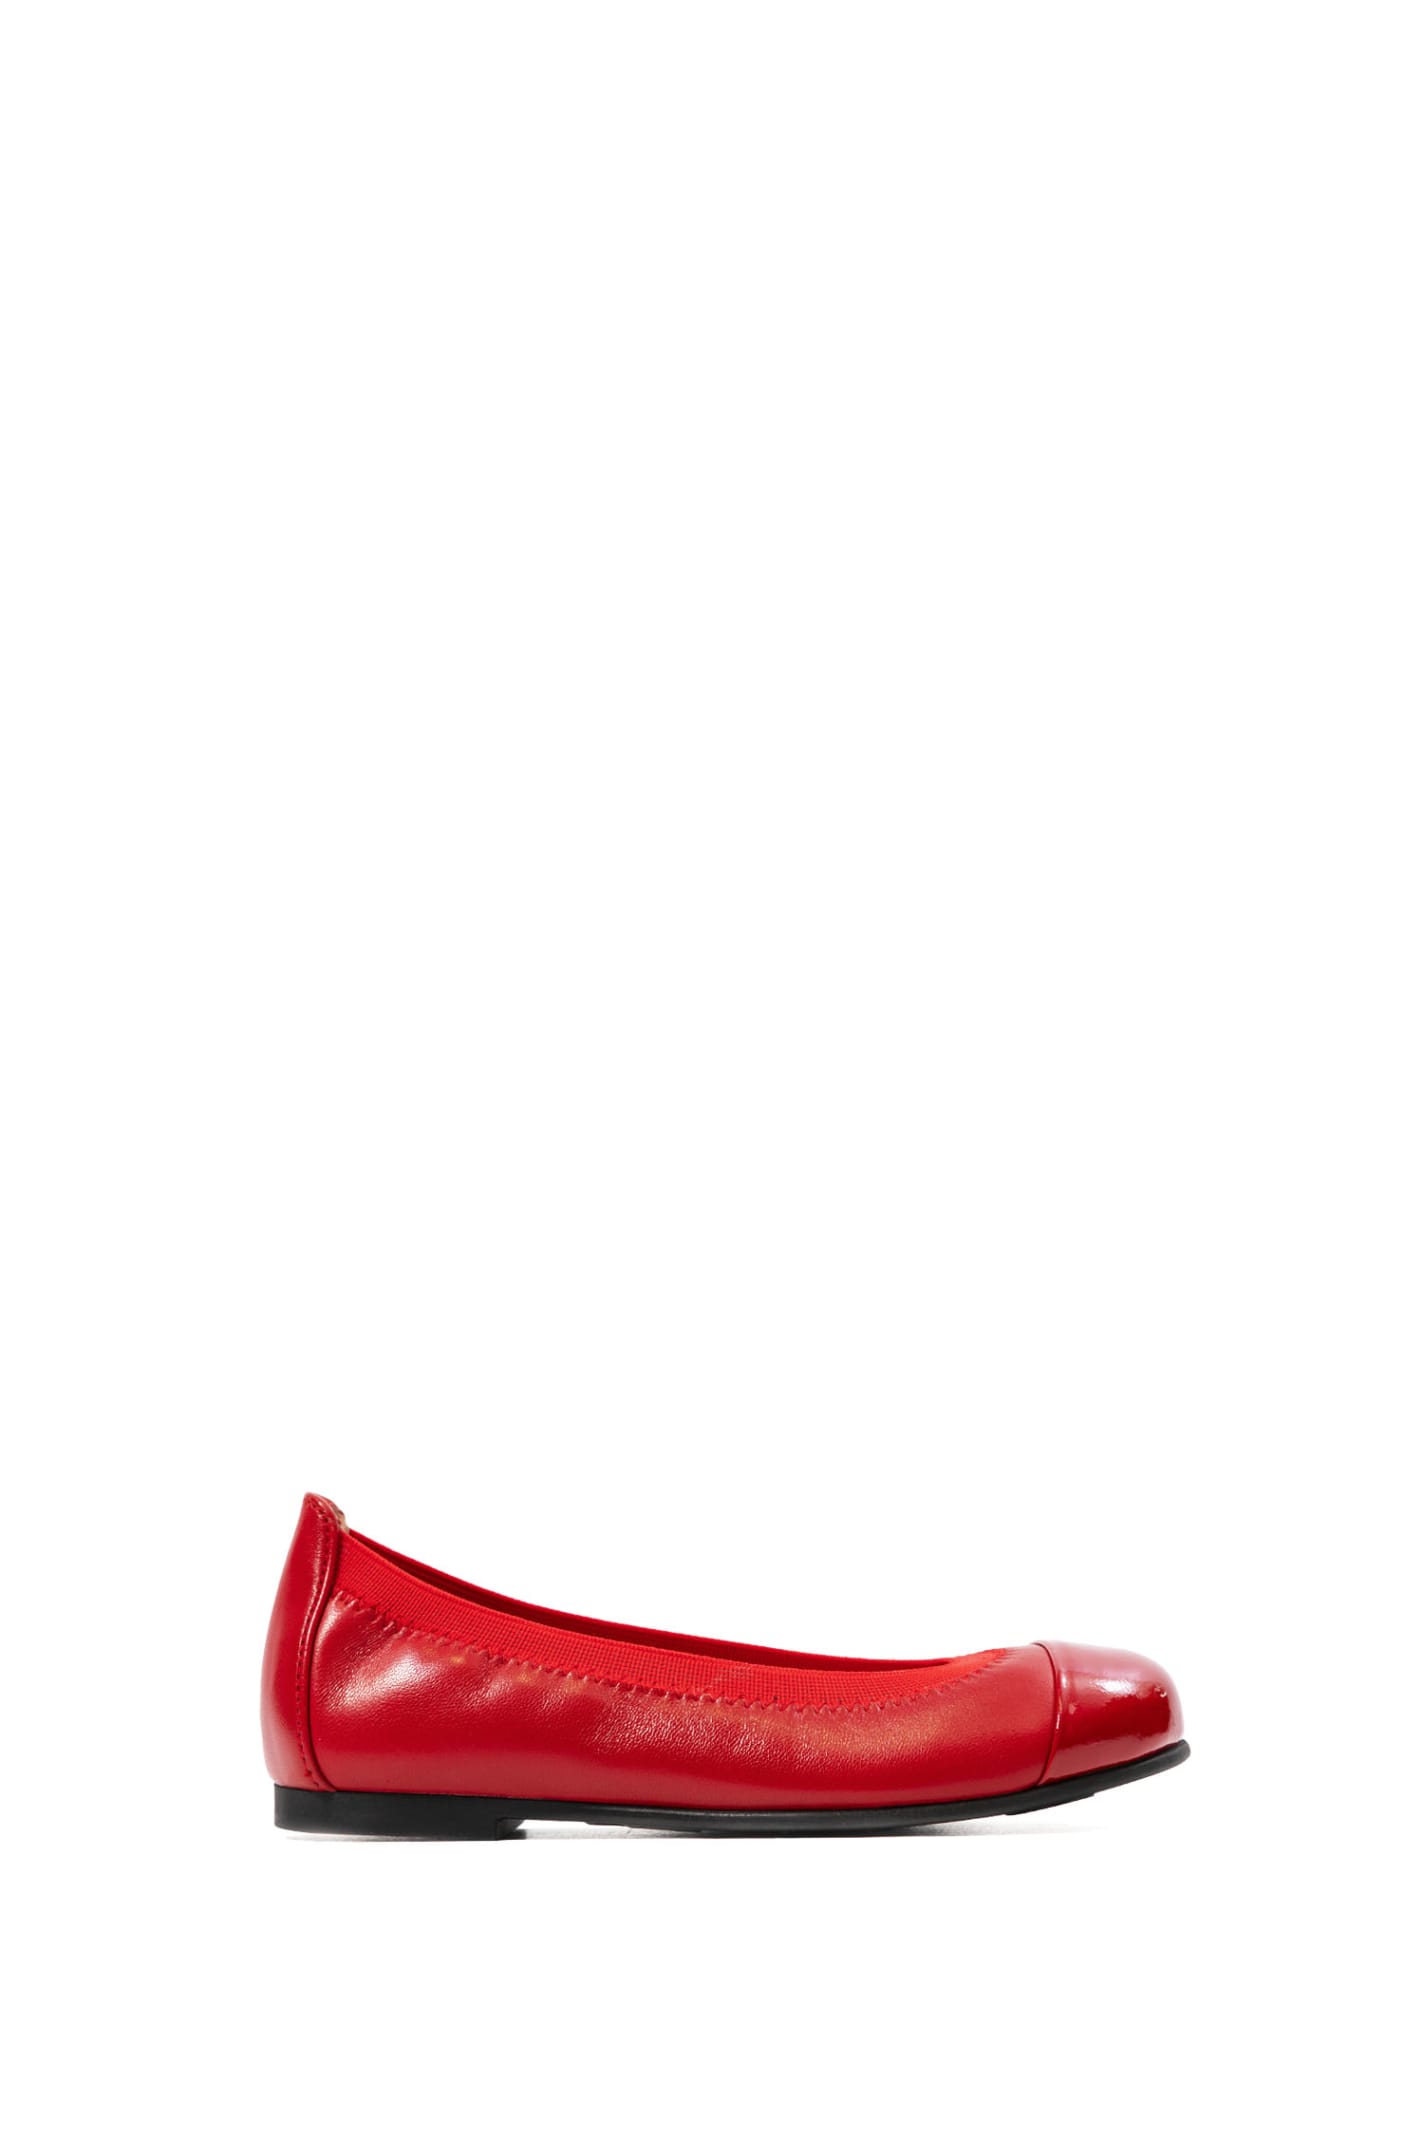 Pretty Ballerinas Kids' Leather Ballet Flats In Red